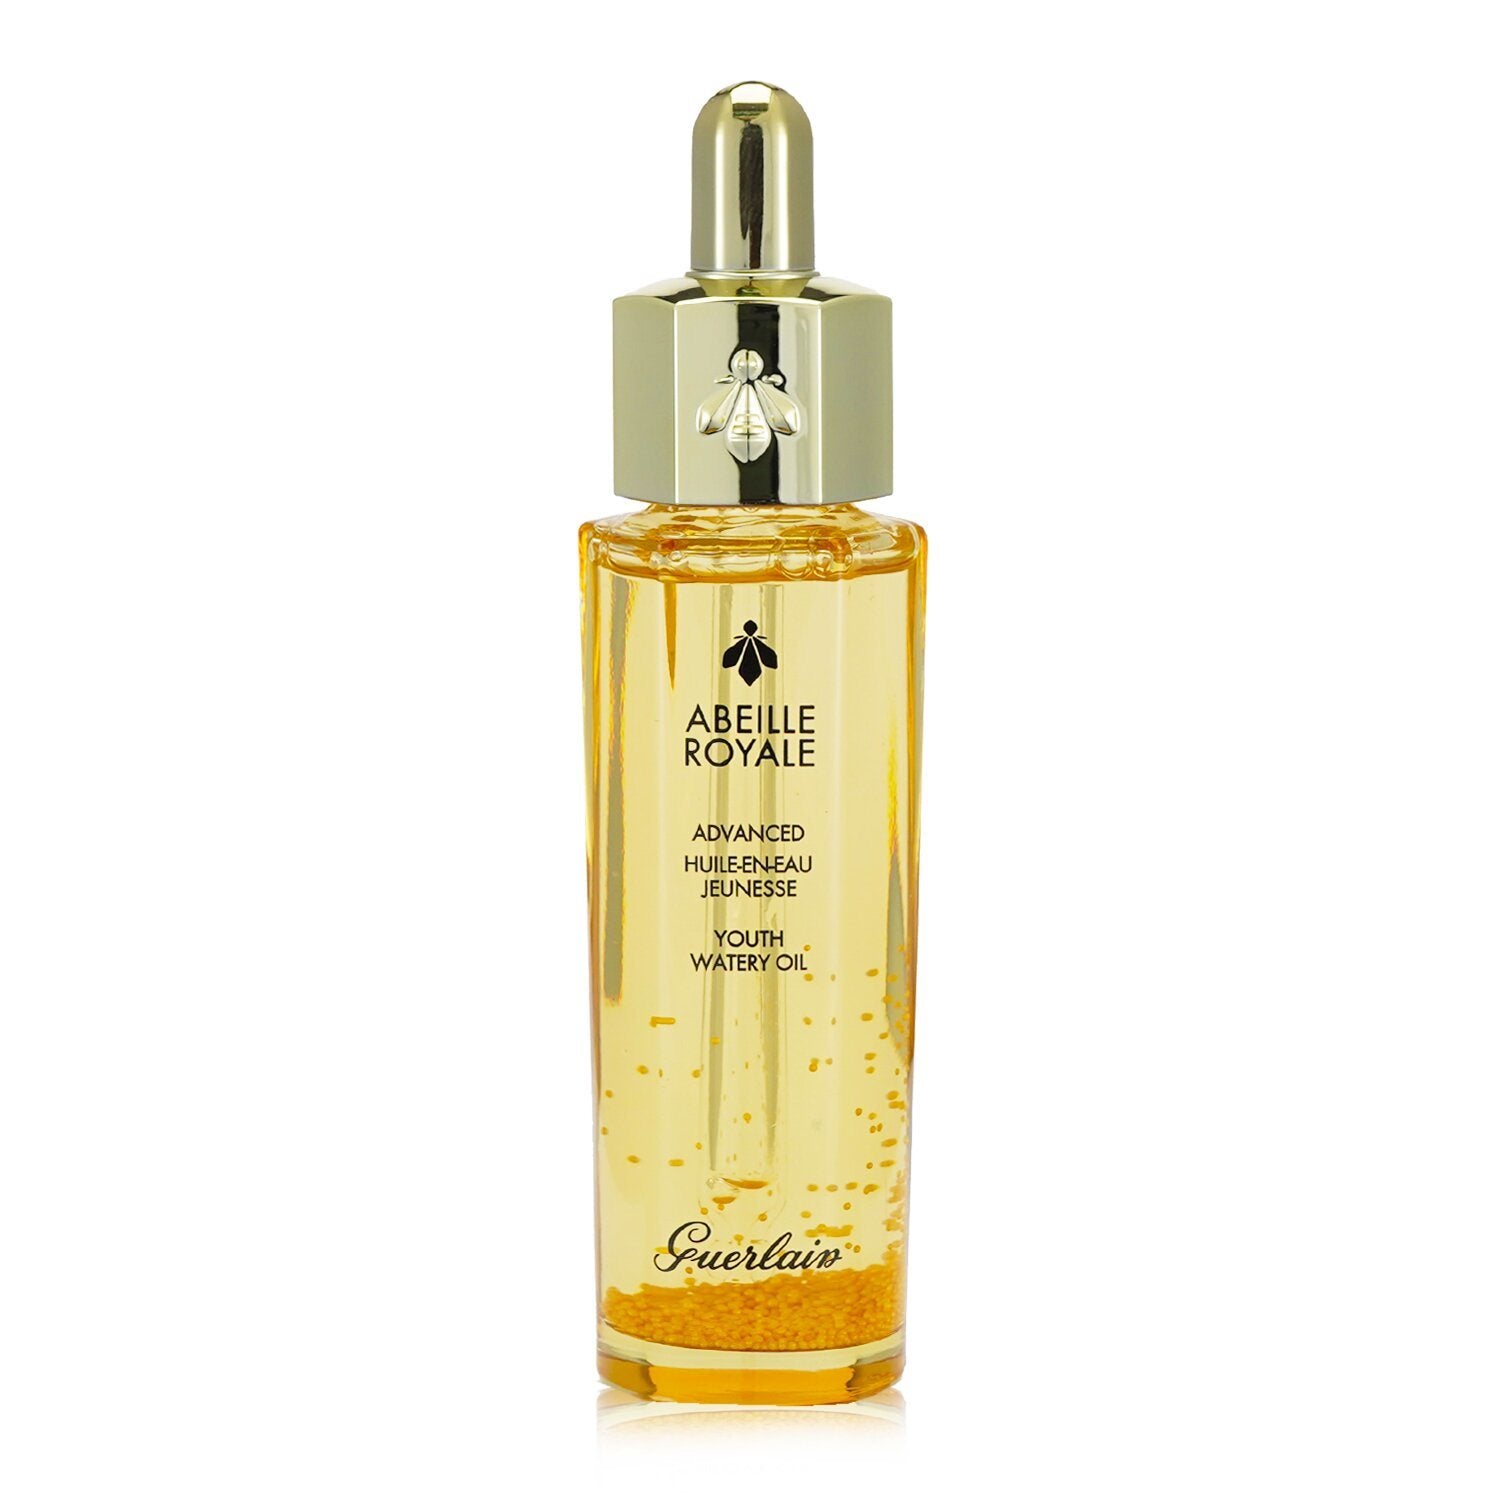 GUERLAIN - Abeille Royale Advanced Youth Watery Oil 616165 30ml/1oz~3P's Inclusive Beauty